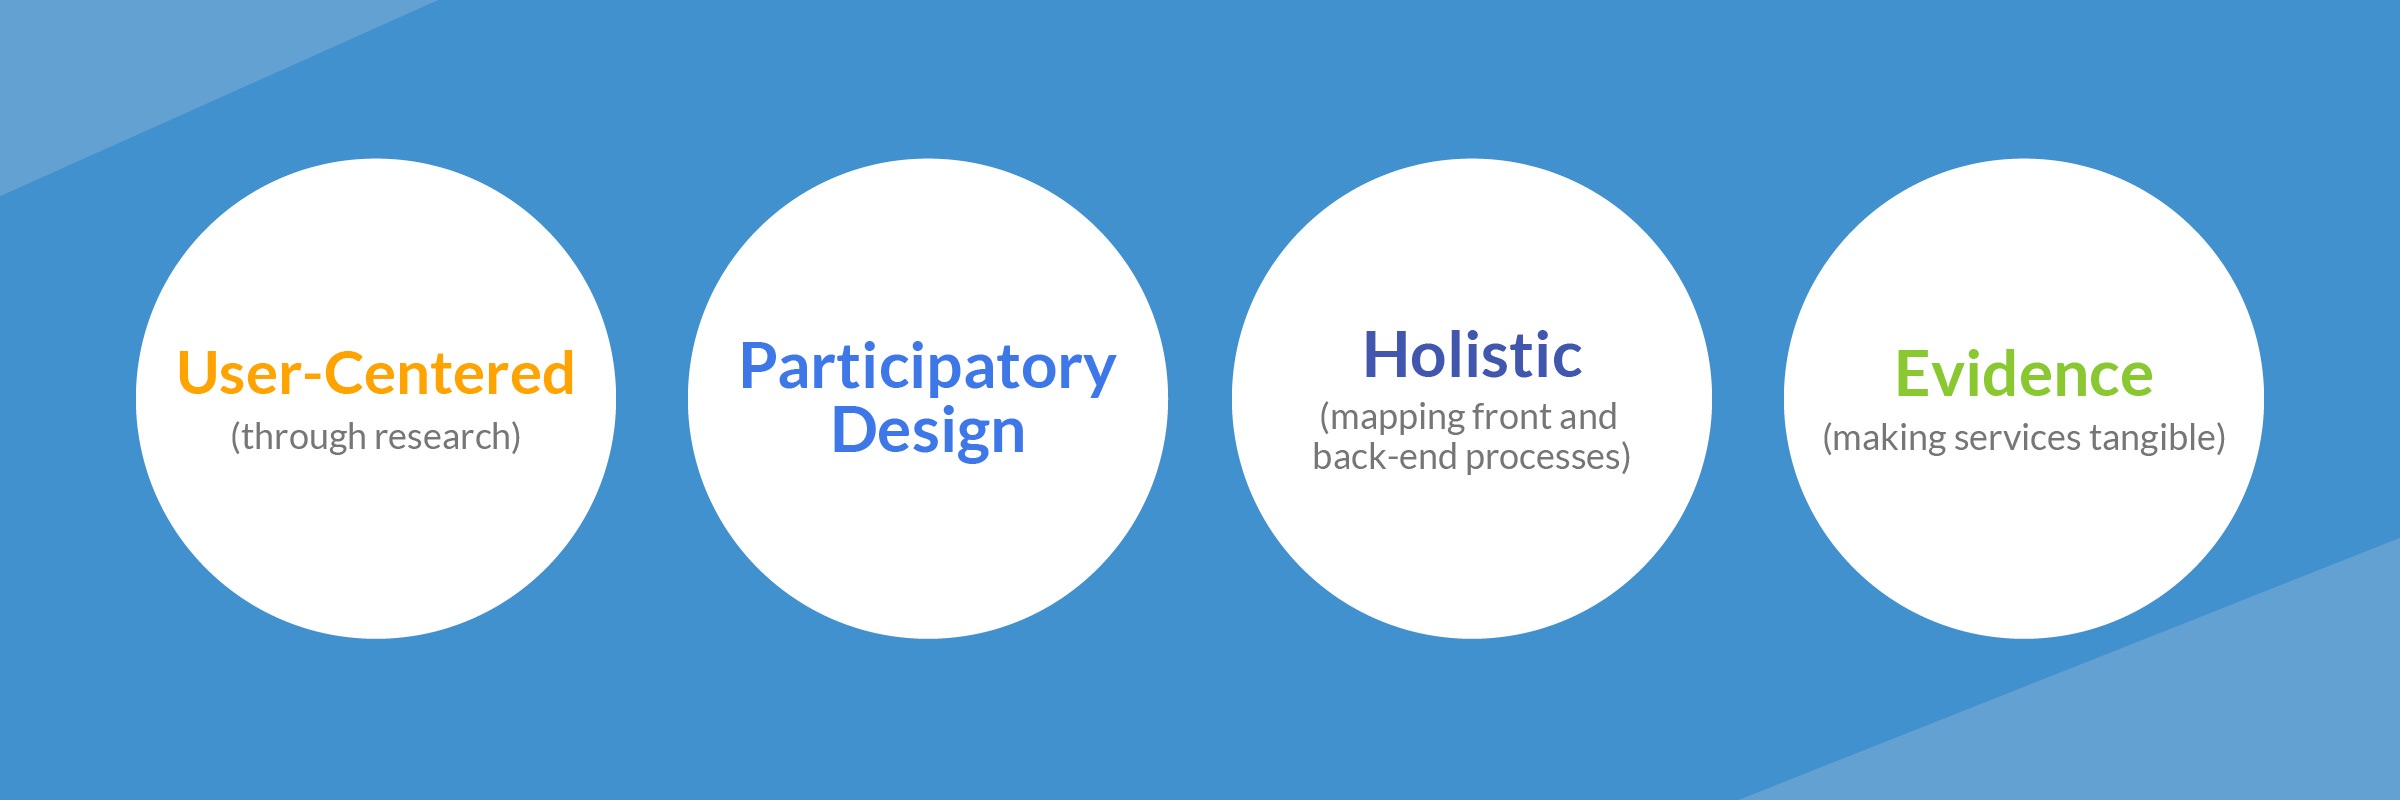 four circles, each with different words inside. The first says "User-Centered (through research)". The second "Participatory Design". The third "Holistic (mapping front and back-end processes)". The last says "Evidence (making services tangible)".